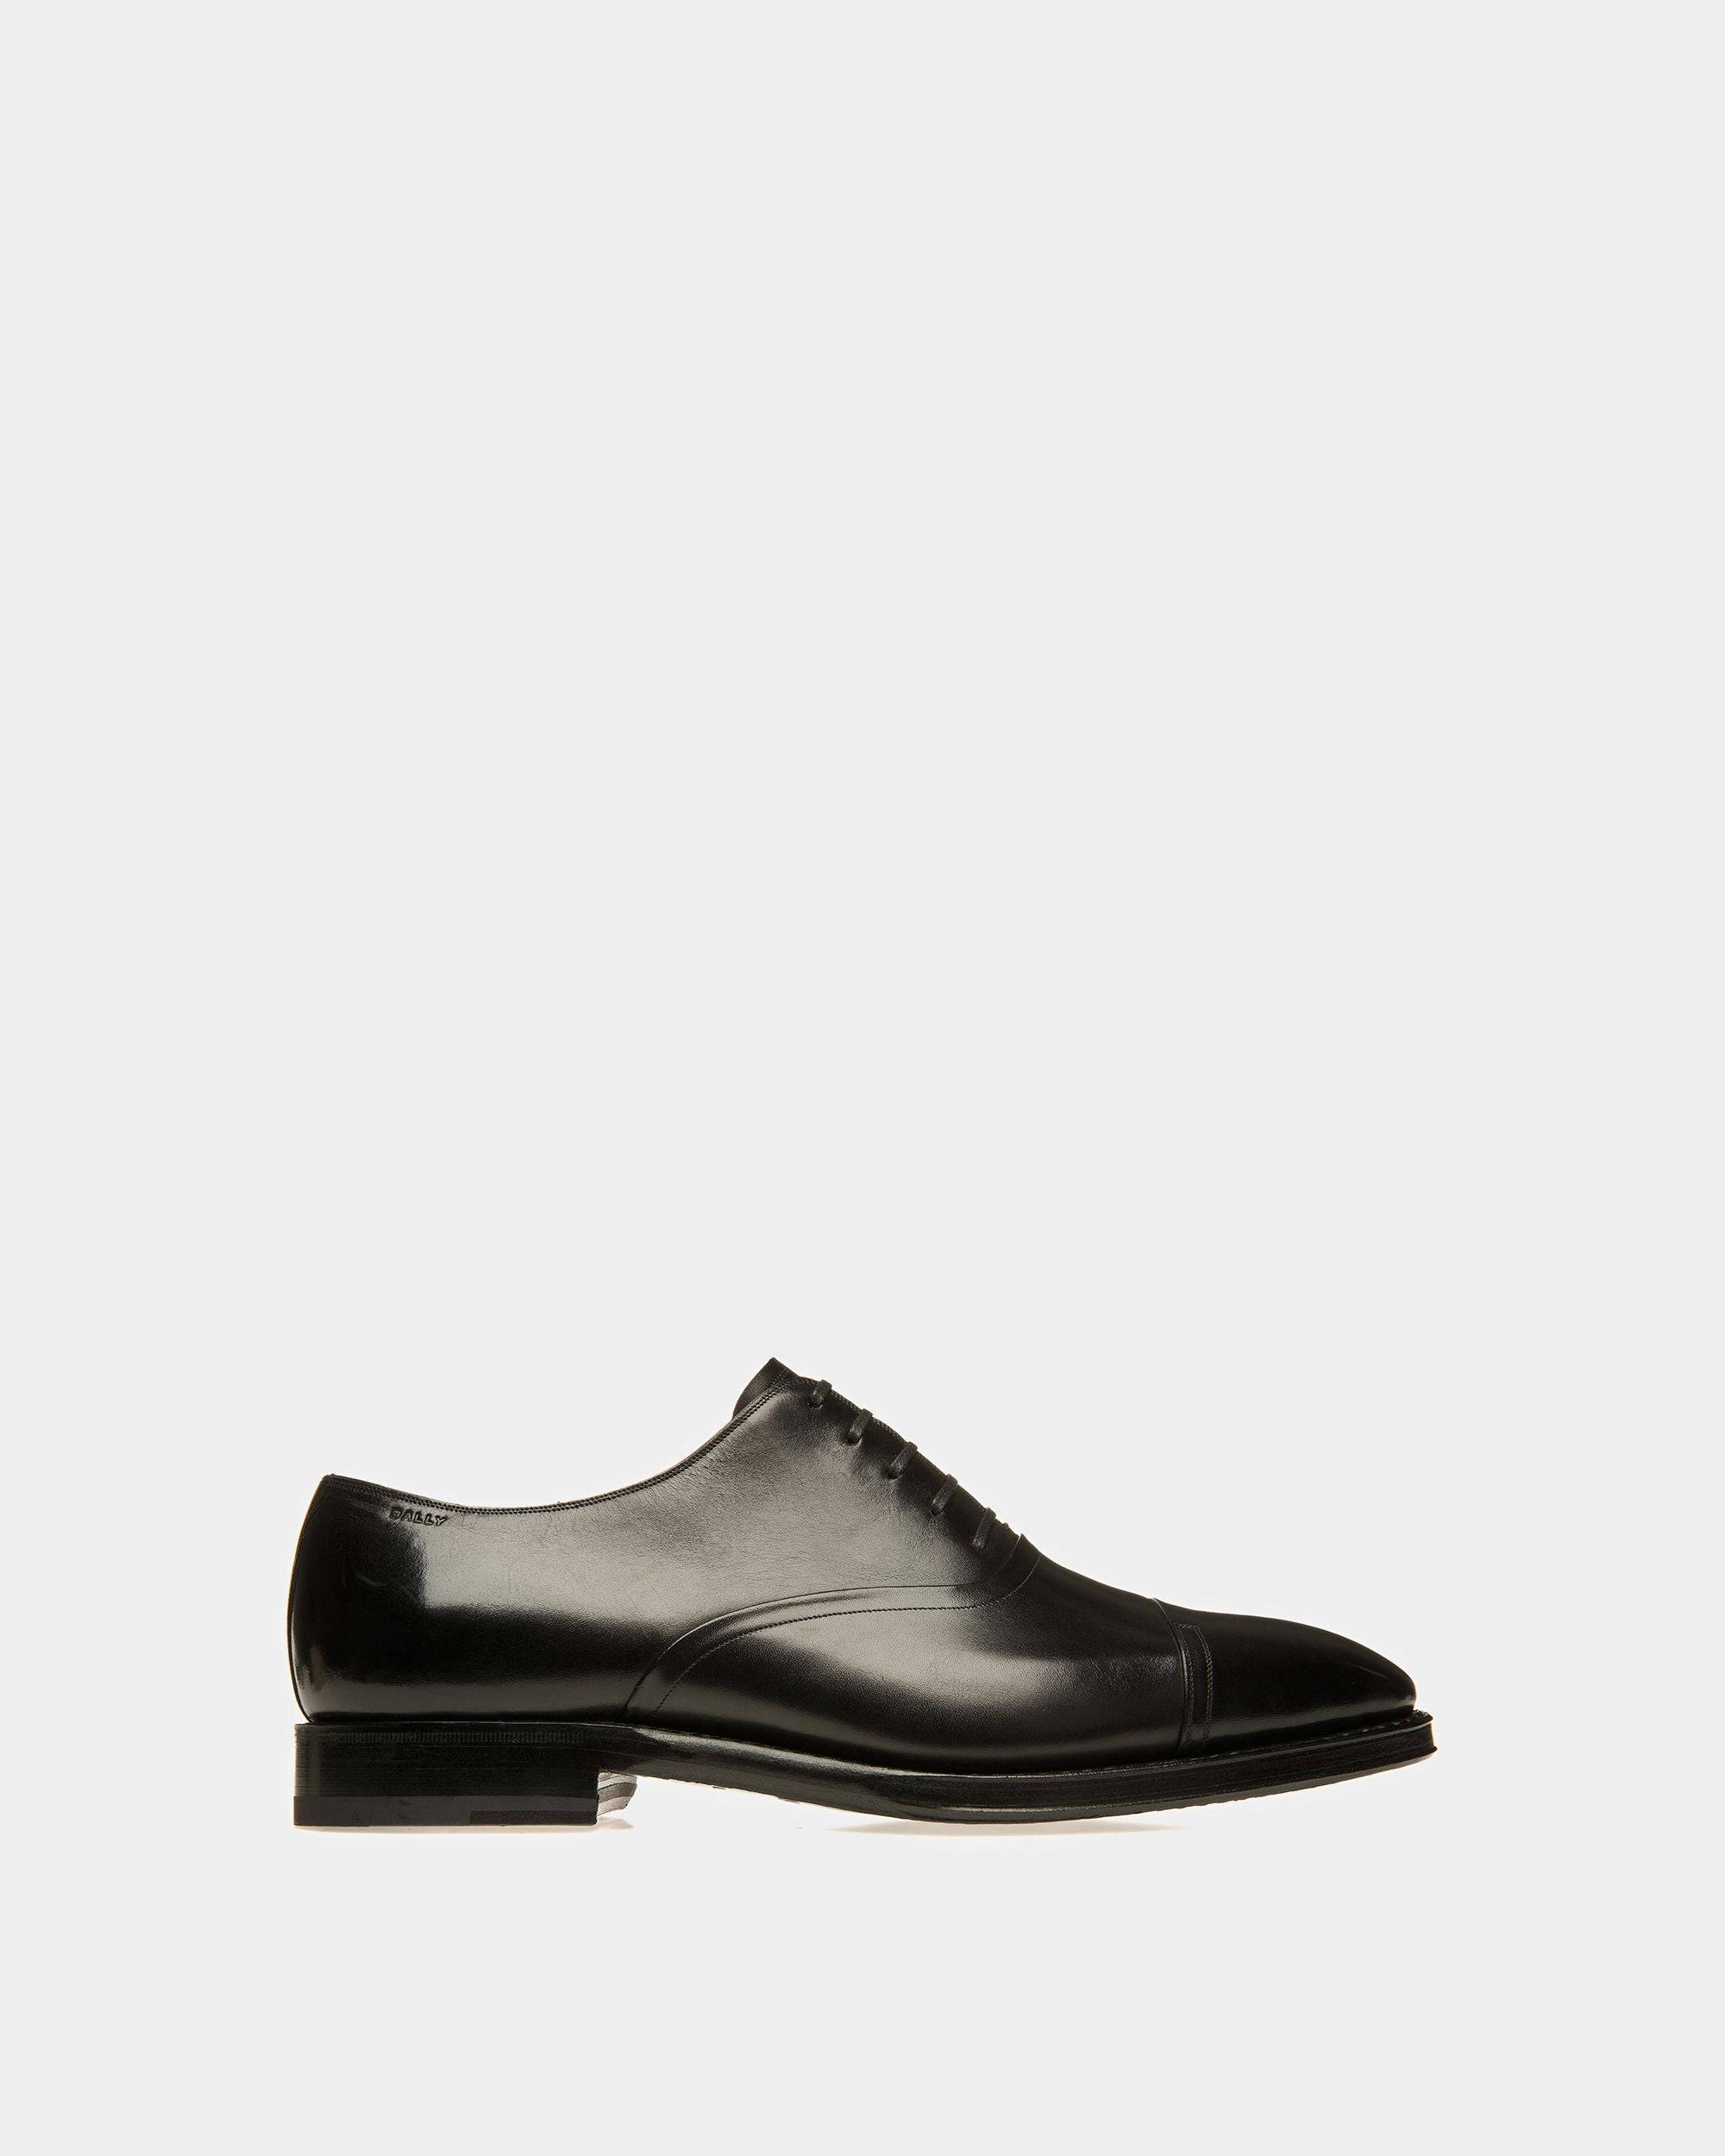 Selby | Men's Oxford Shoes | Black Leather | Still Life Side